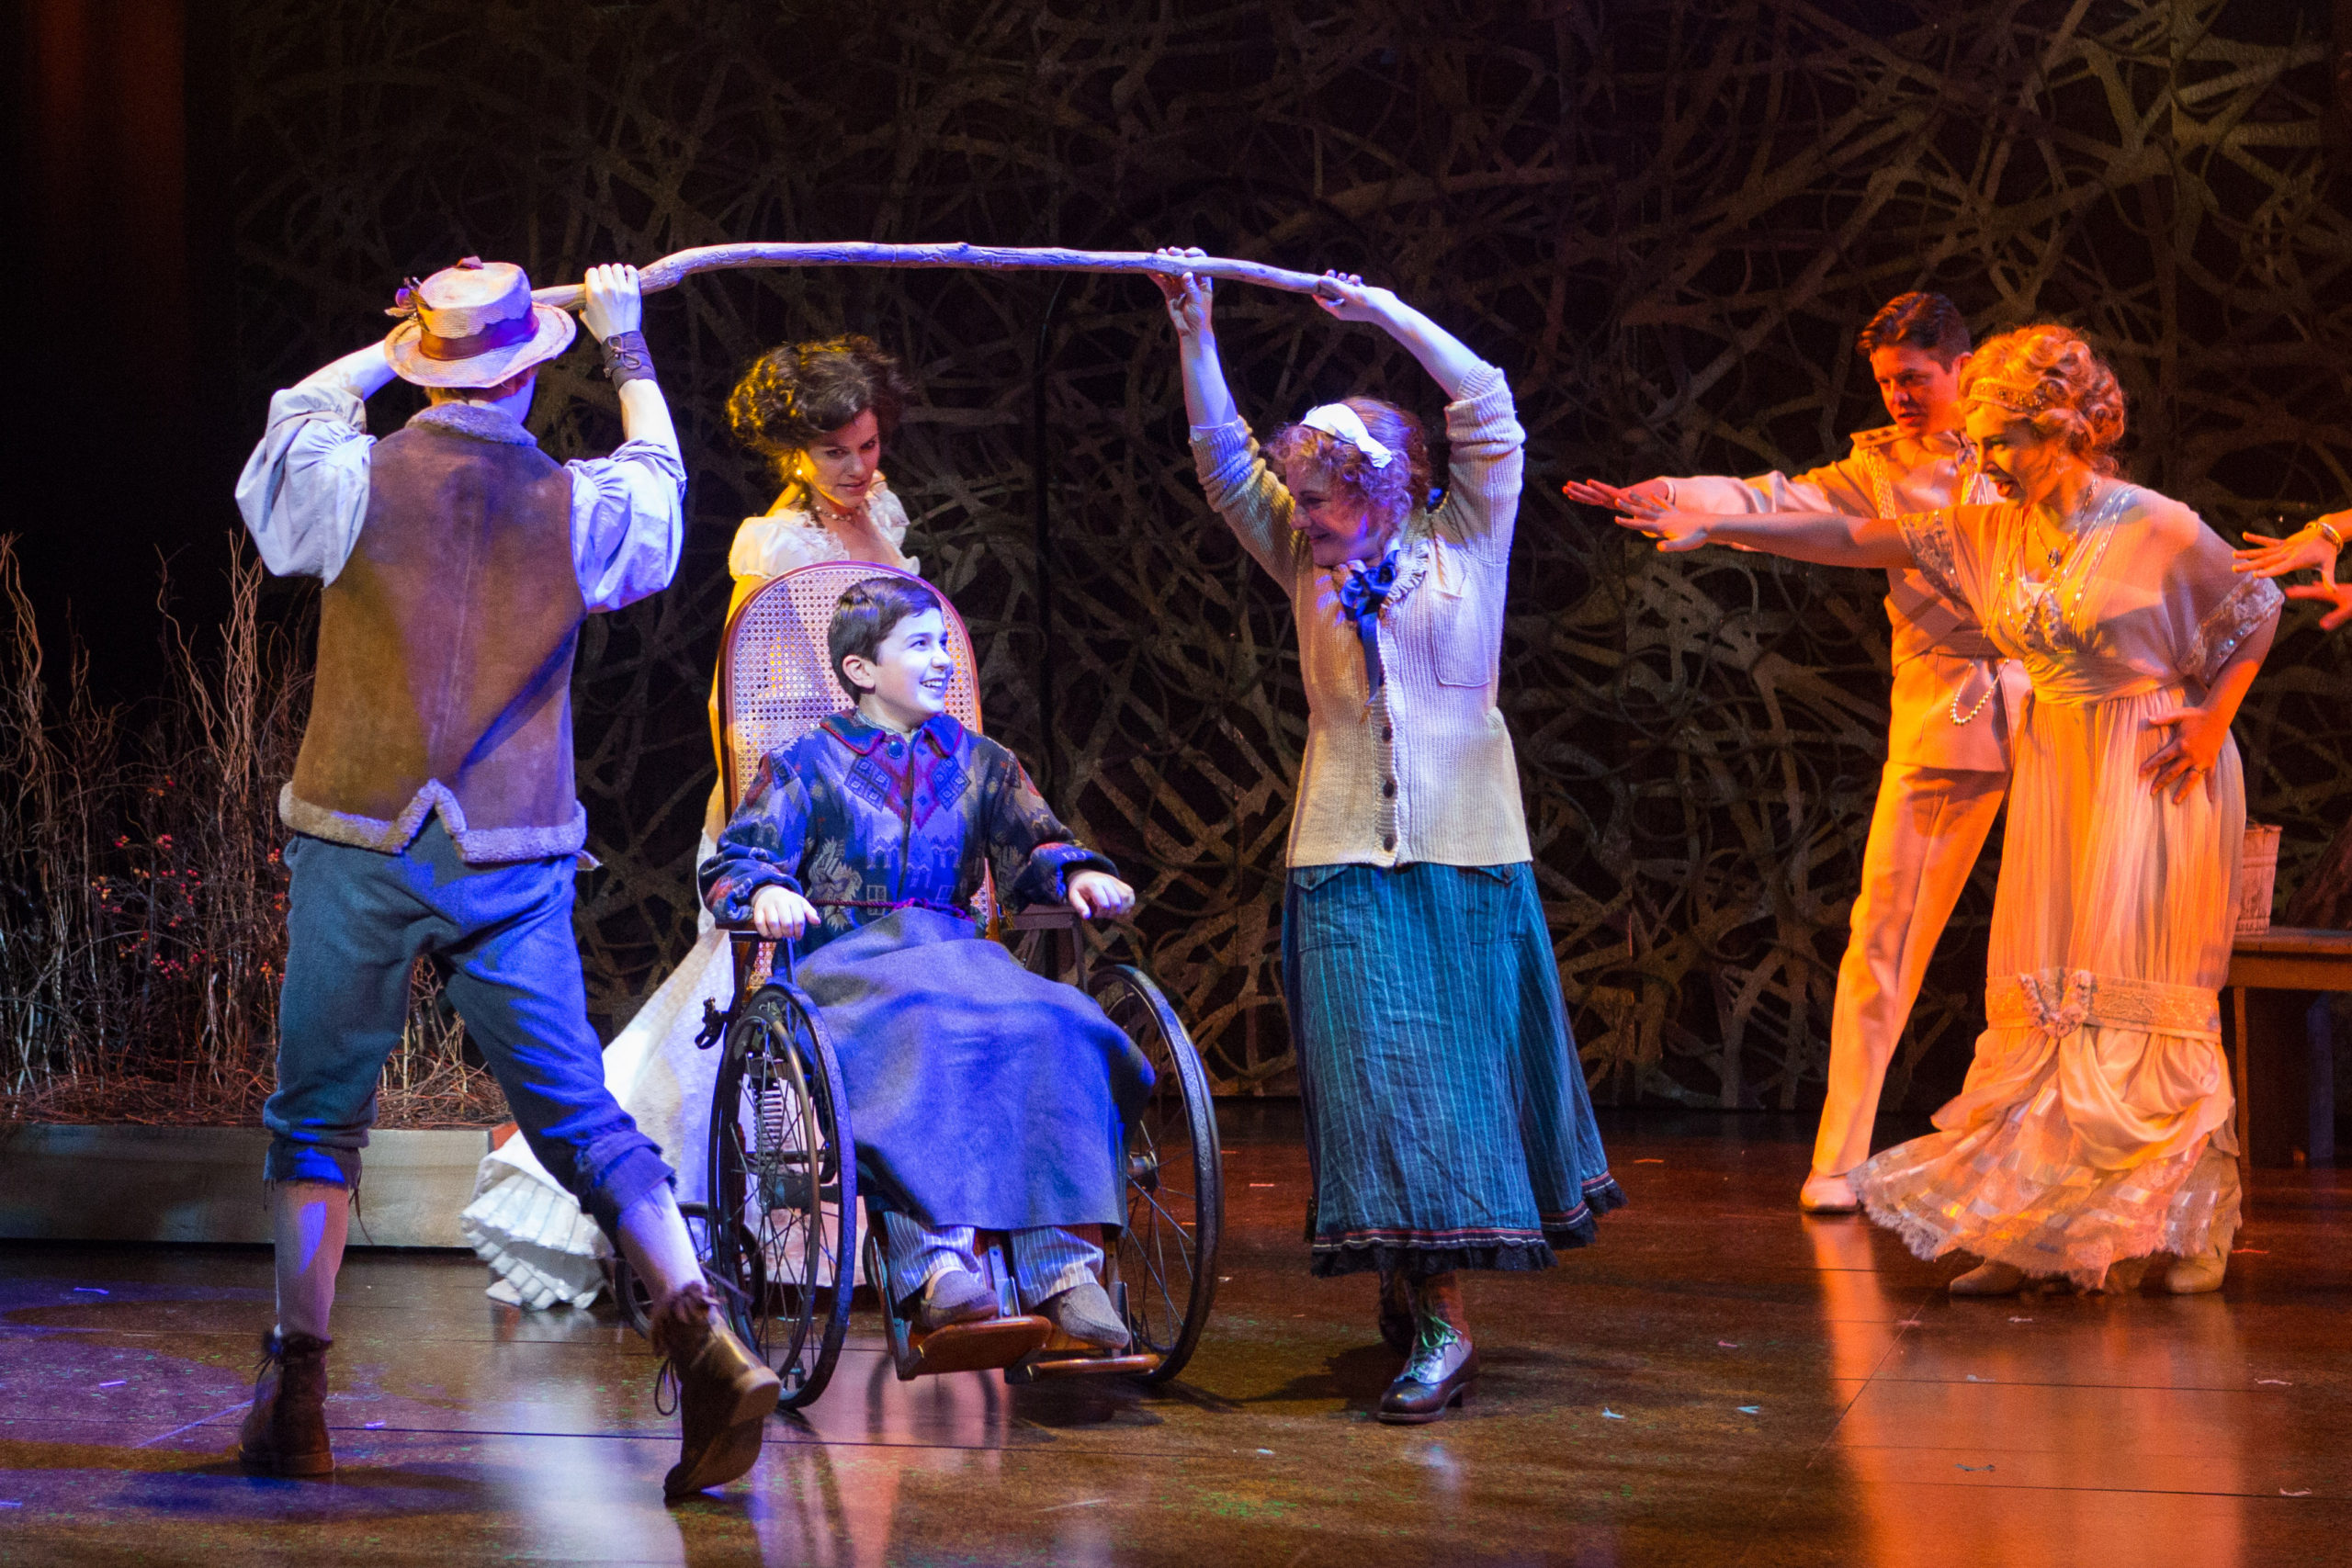 The cast of The Secret Garden singing "Come Spirit, Come Charm" in the Shakespeare Theatre Company's production of The Secret Garden, 2016-2017 (Image from the Shakespeare Theatre Company).